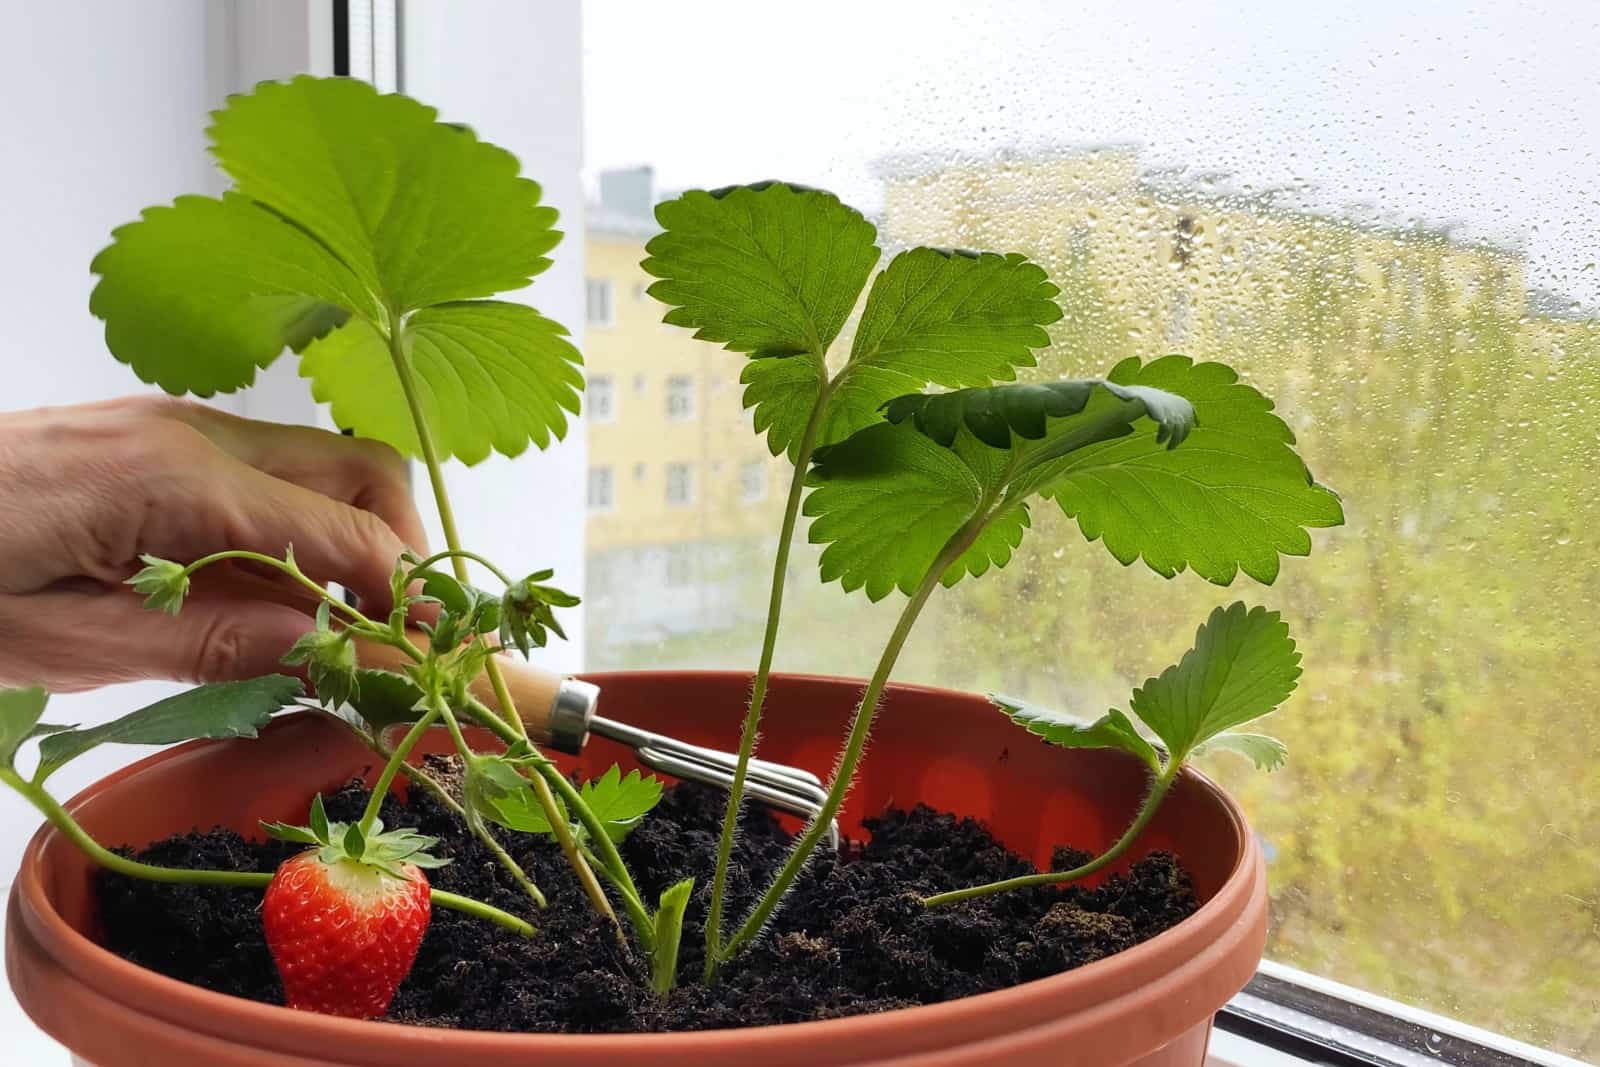 Scratch the ground with a rake under strawberry seedlings on window sill